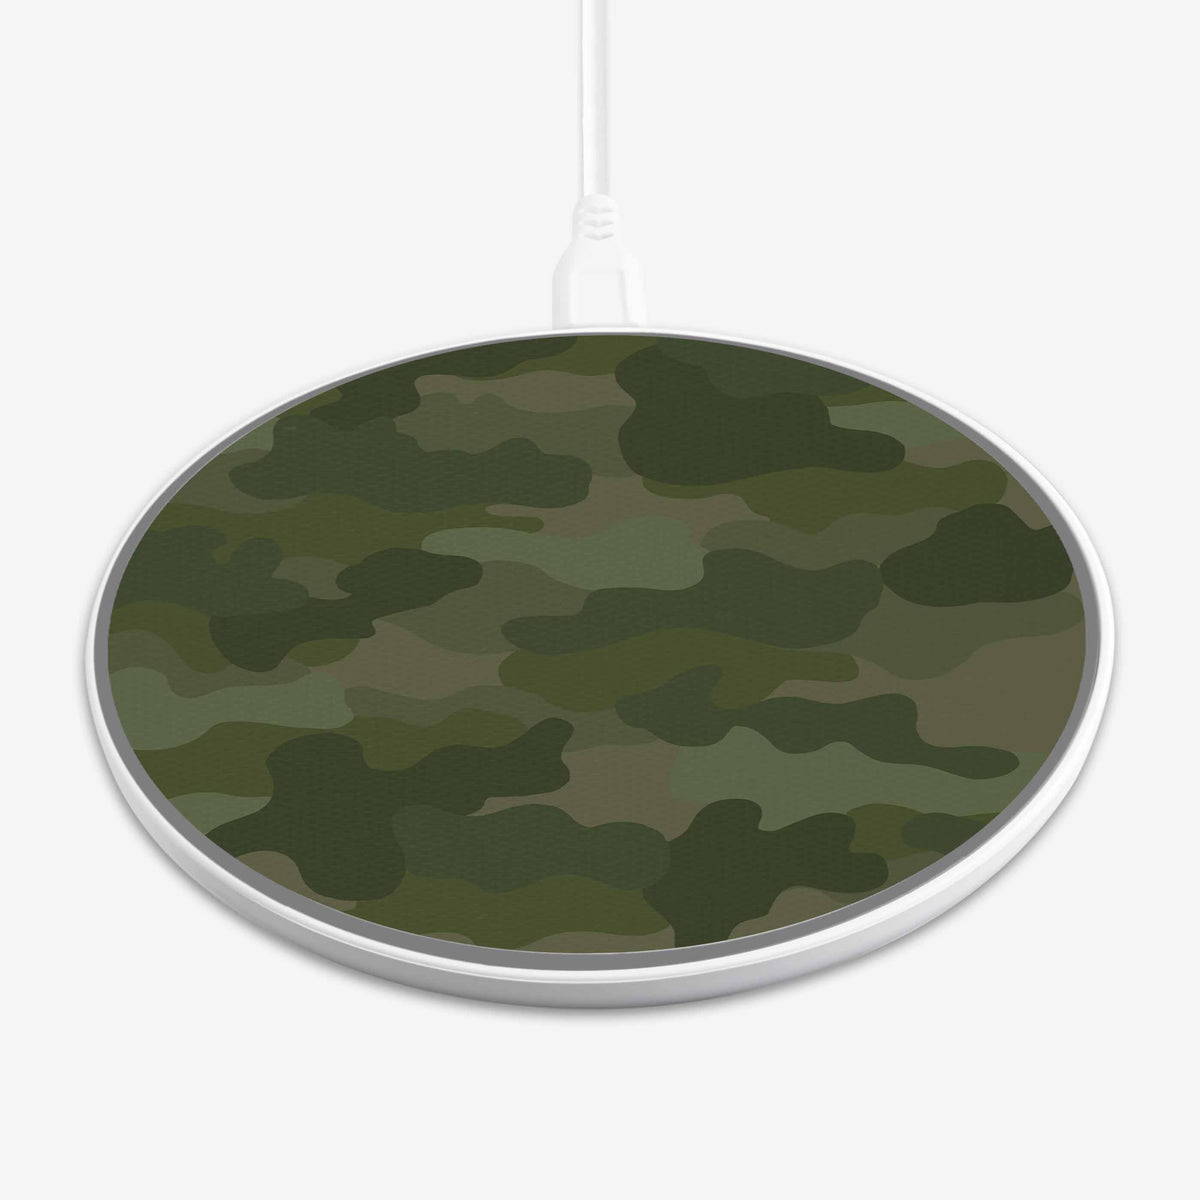 Wireless Charging Pad - Green Camo Design (Front View)